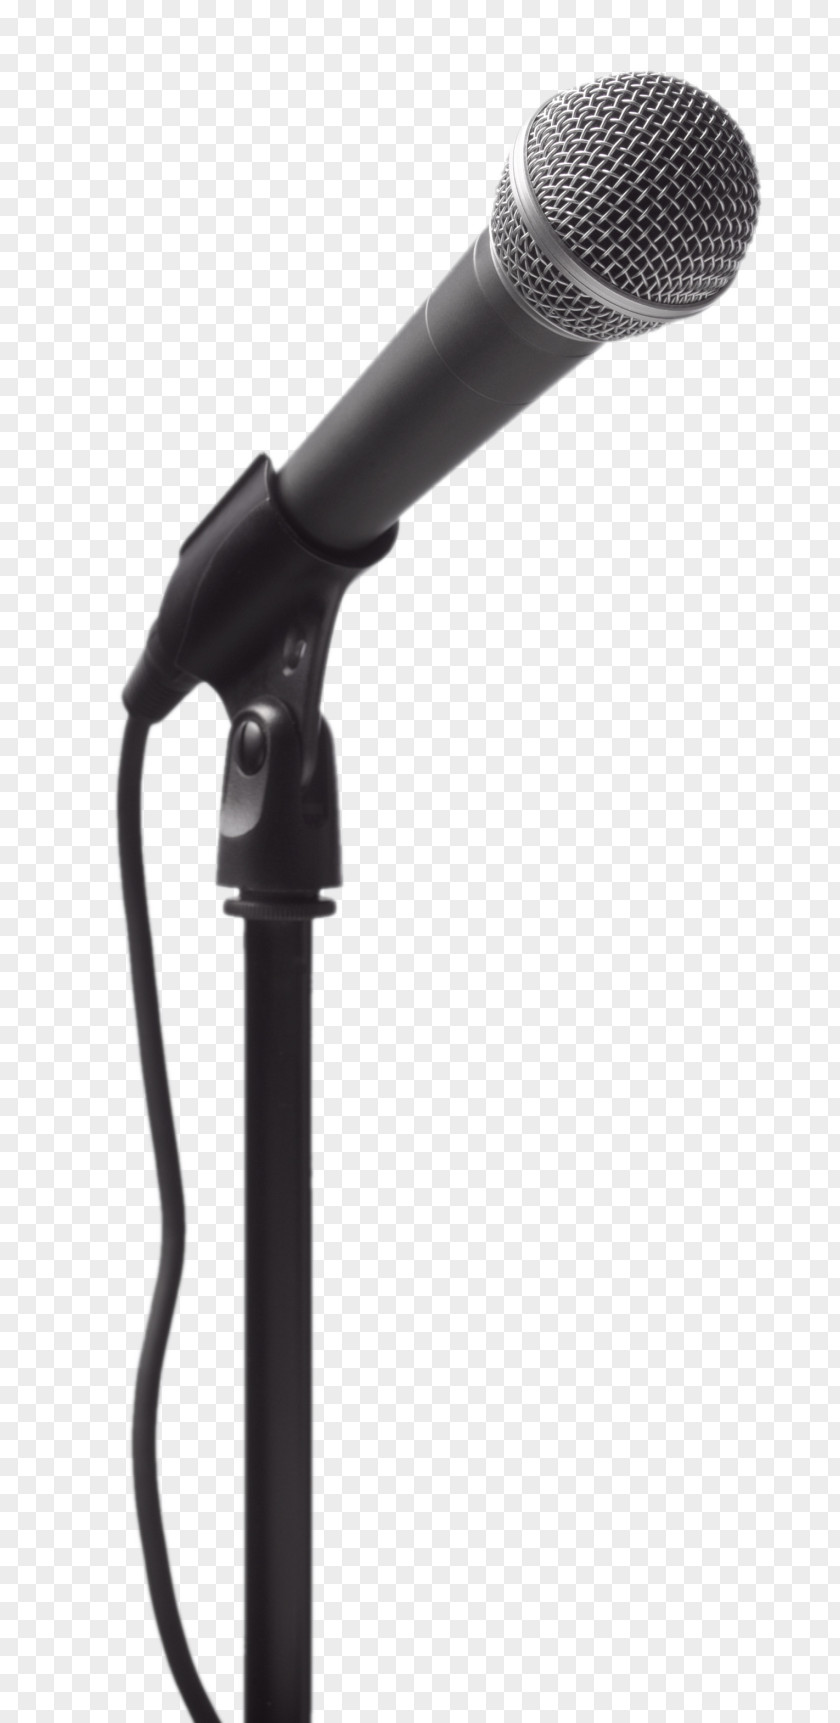 Microphone PNG clipart PNG